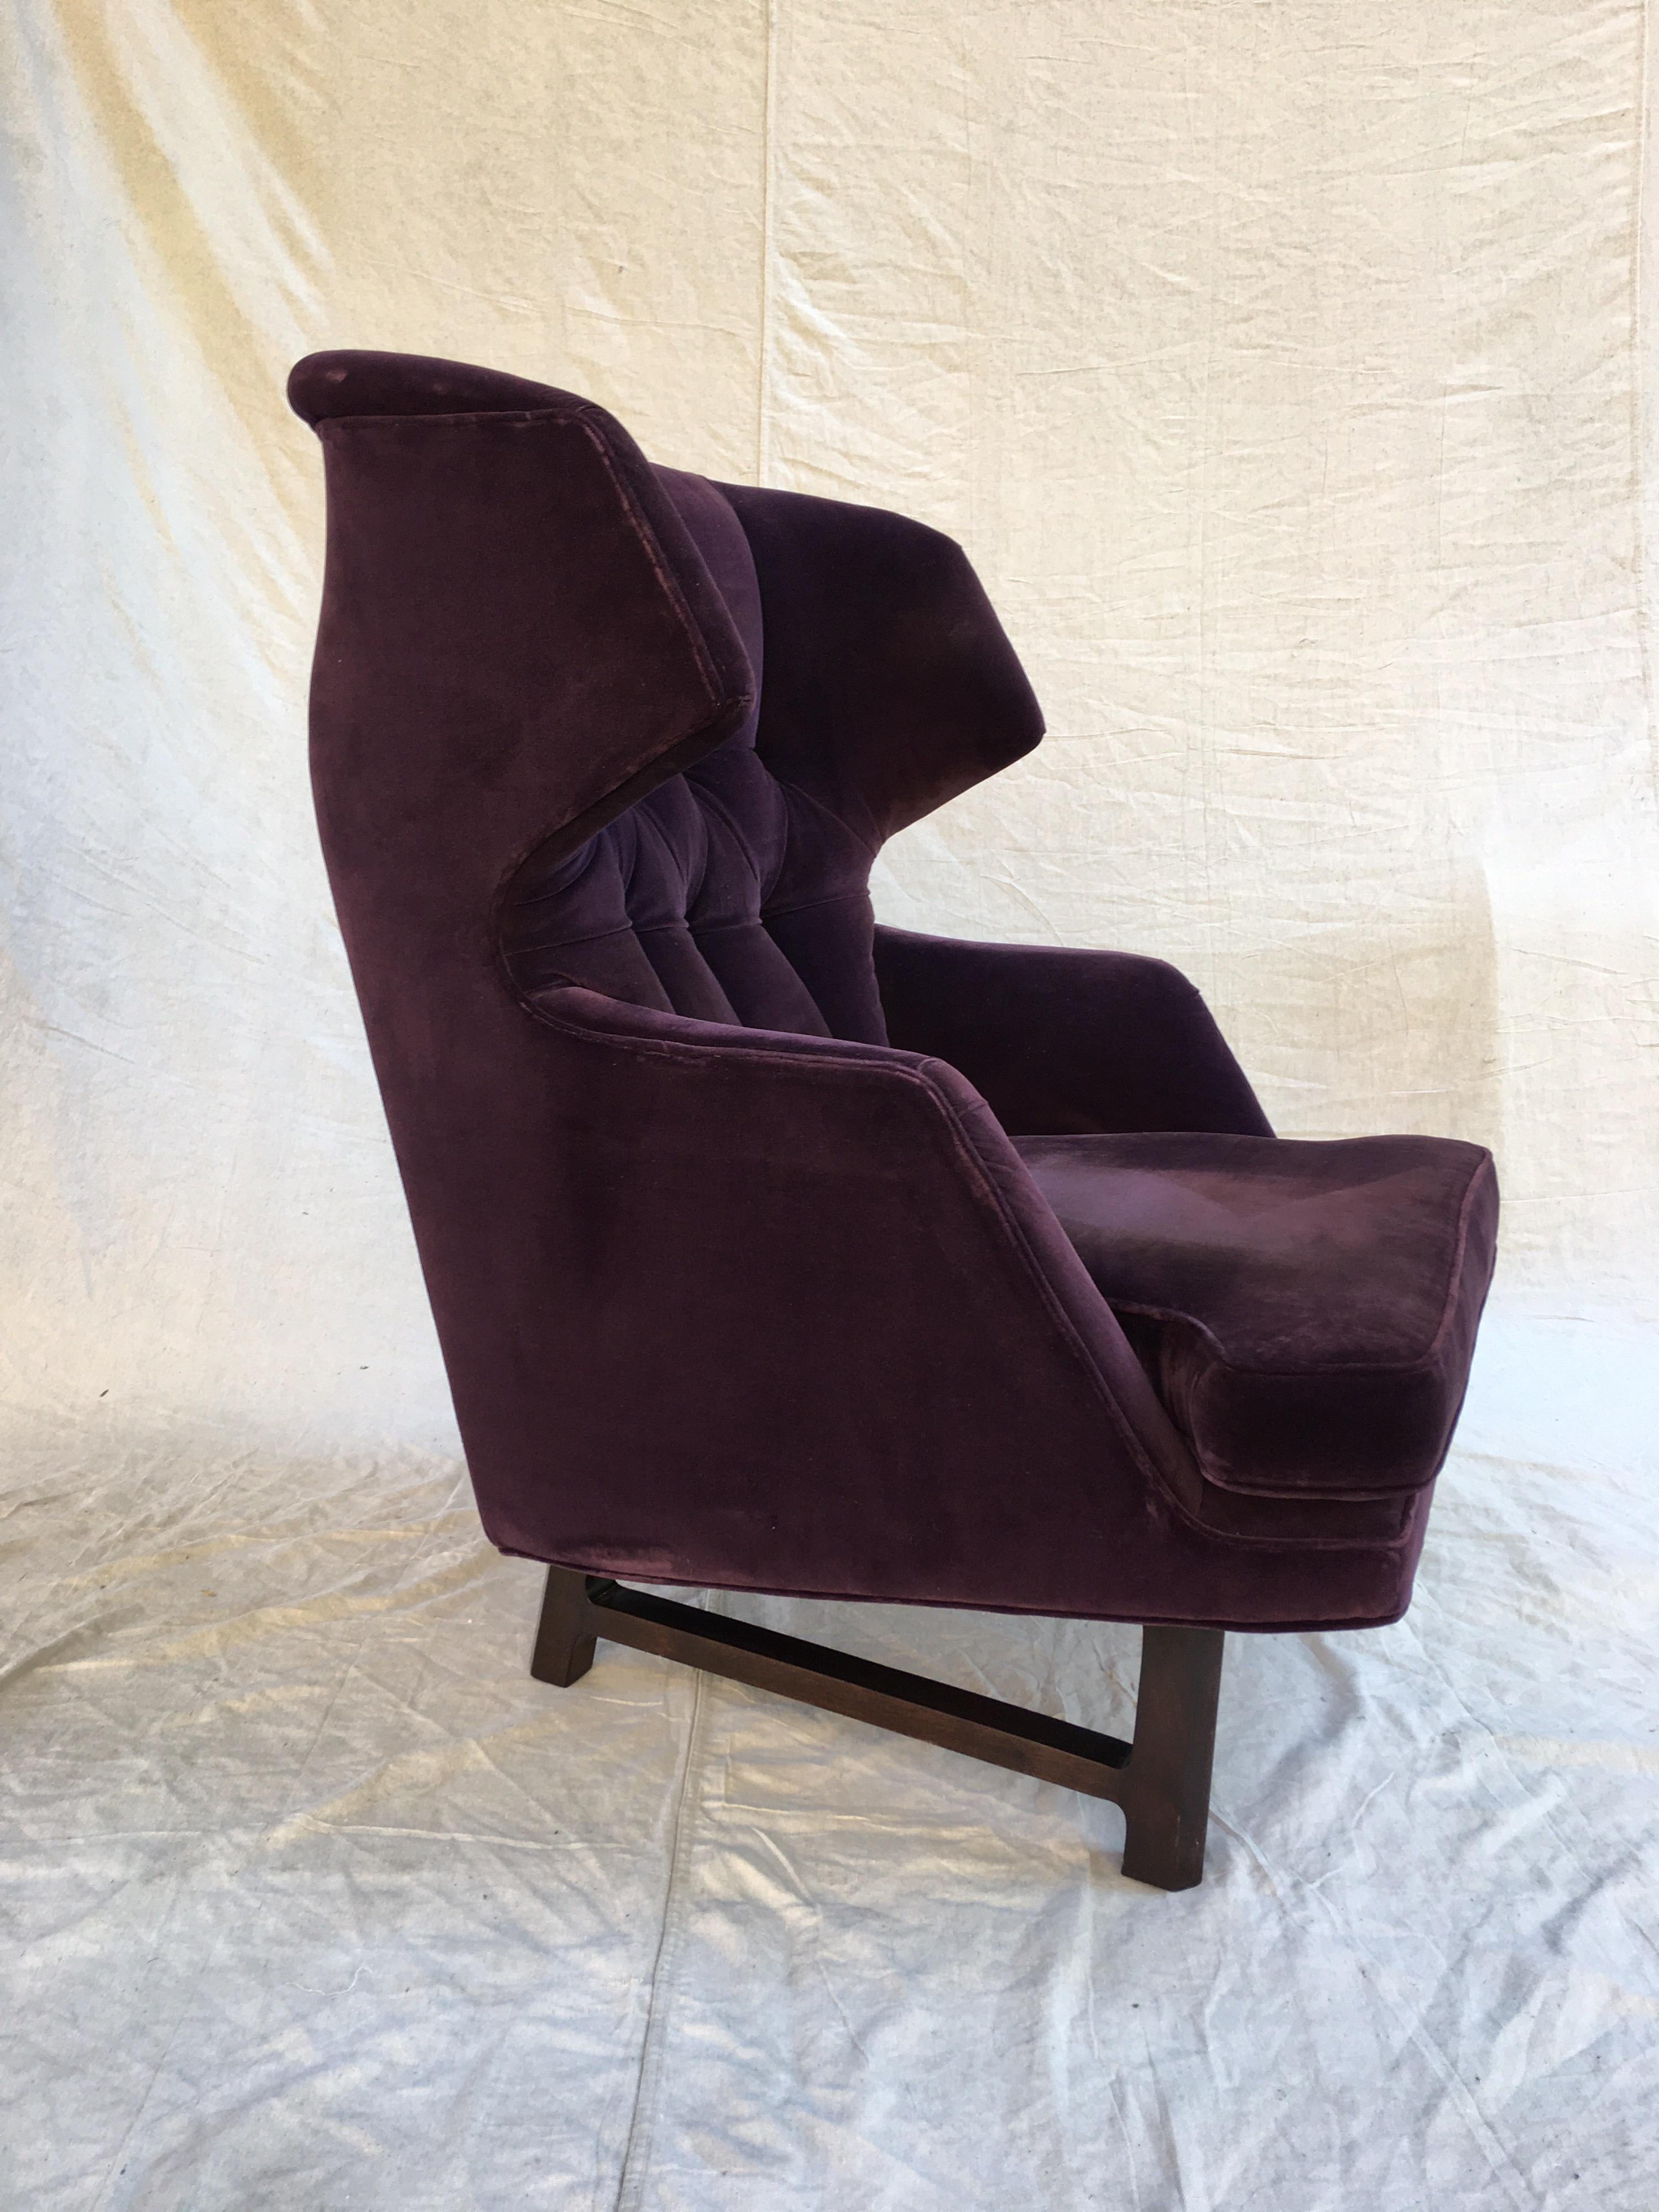 Edward Wormley for Dunbar Classic Janus Wing back lounge chair!  In it's original purple velvet. Seat cushion at some point had its down filled cushion replaced with foam. Overall in excellent condition. One of his most iconic designs!